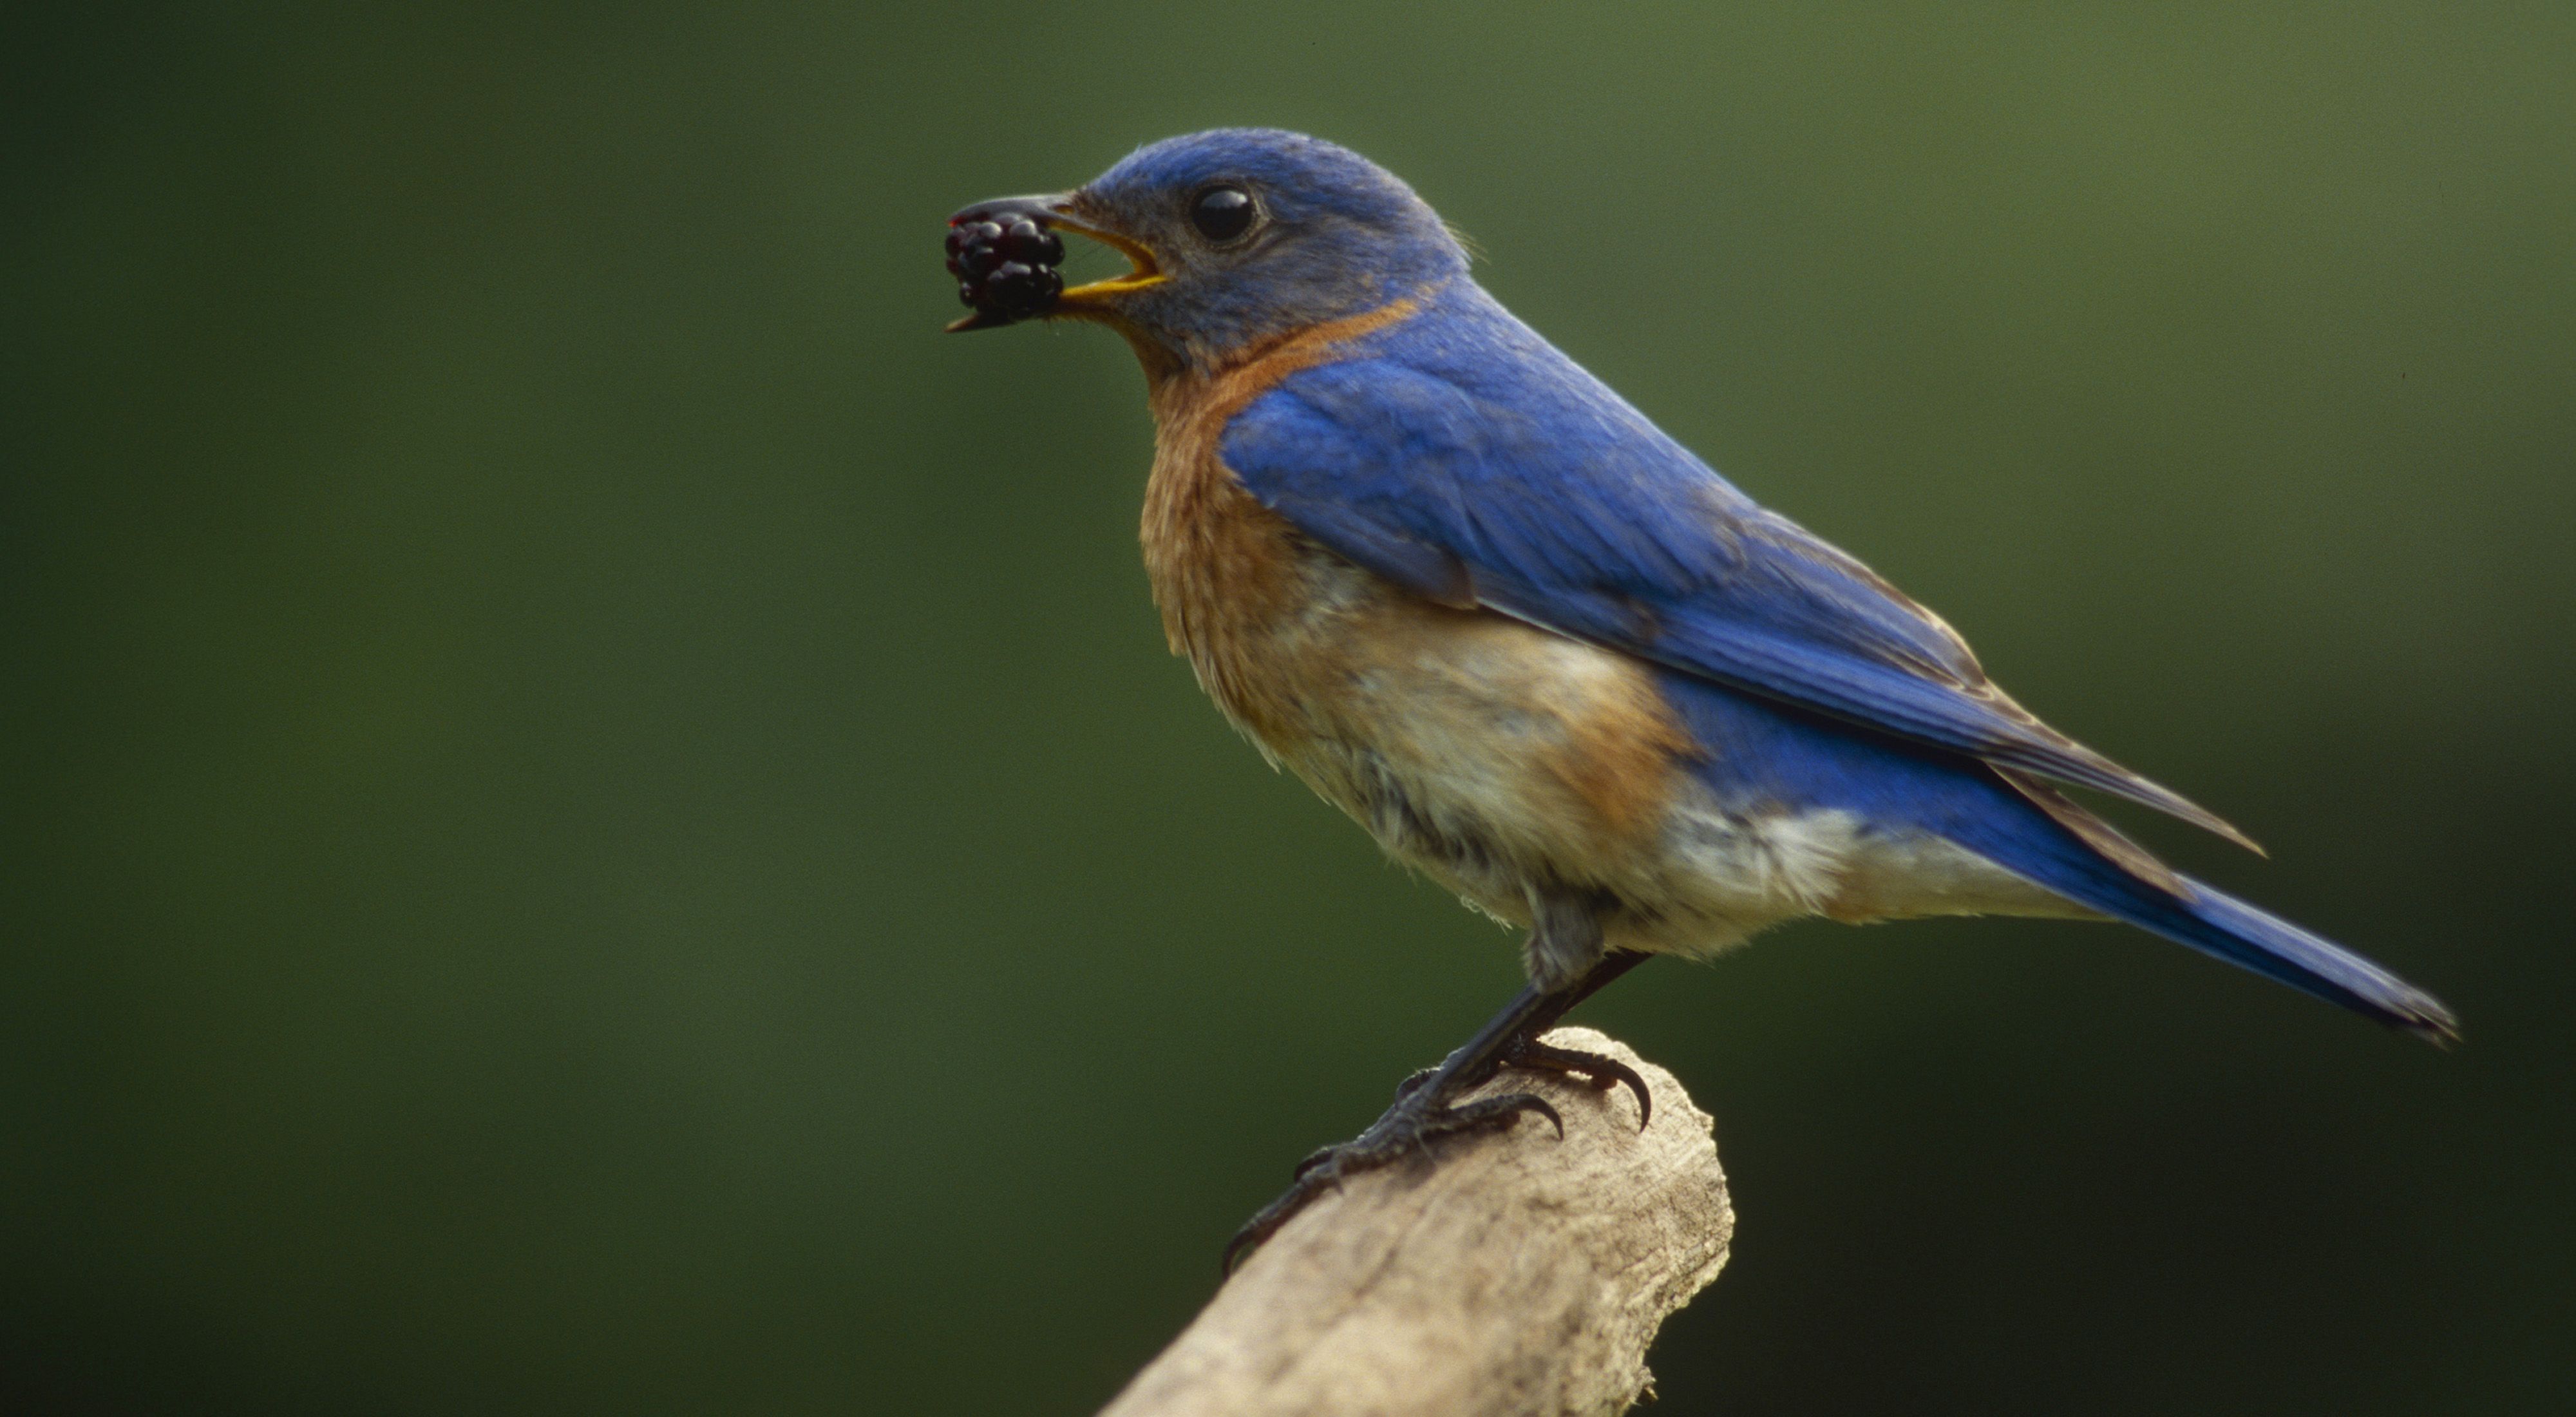 An Eastern Bluebird holds a large berry in its beak.